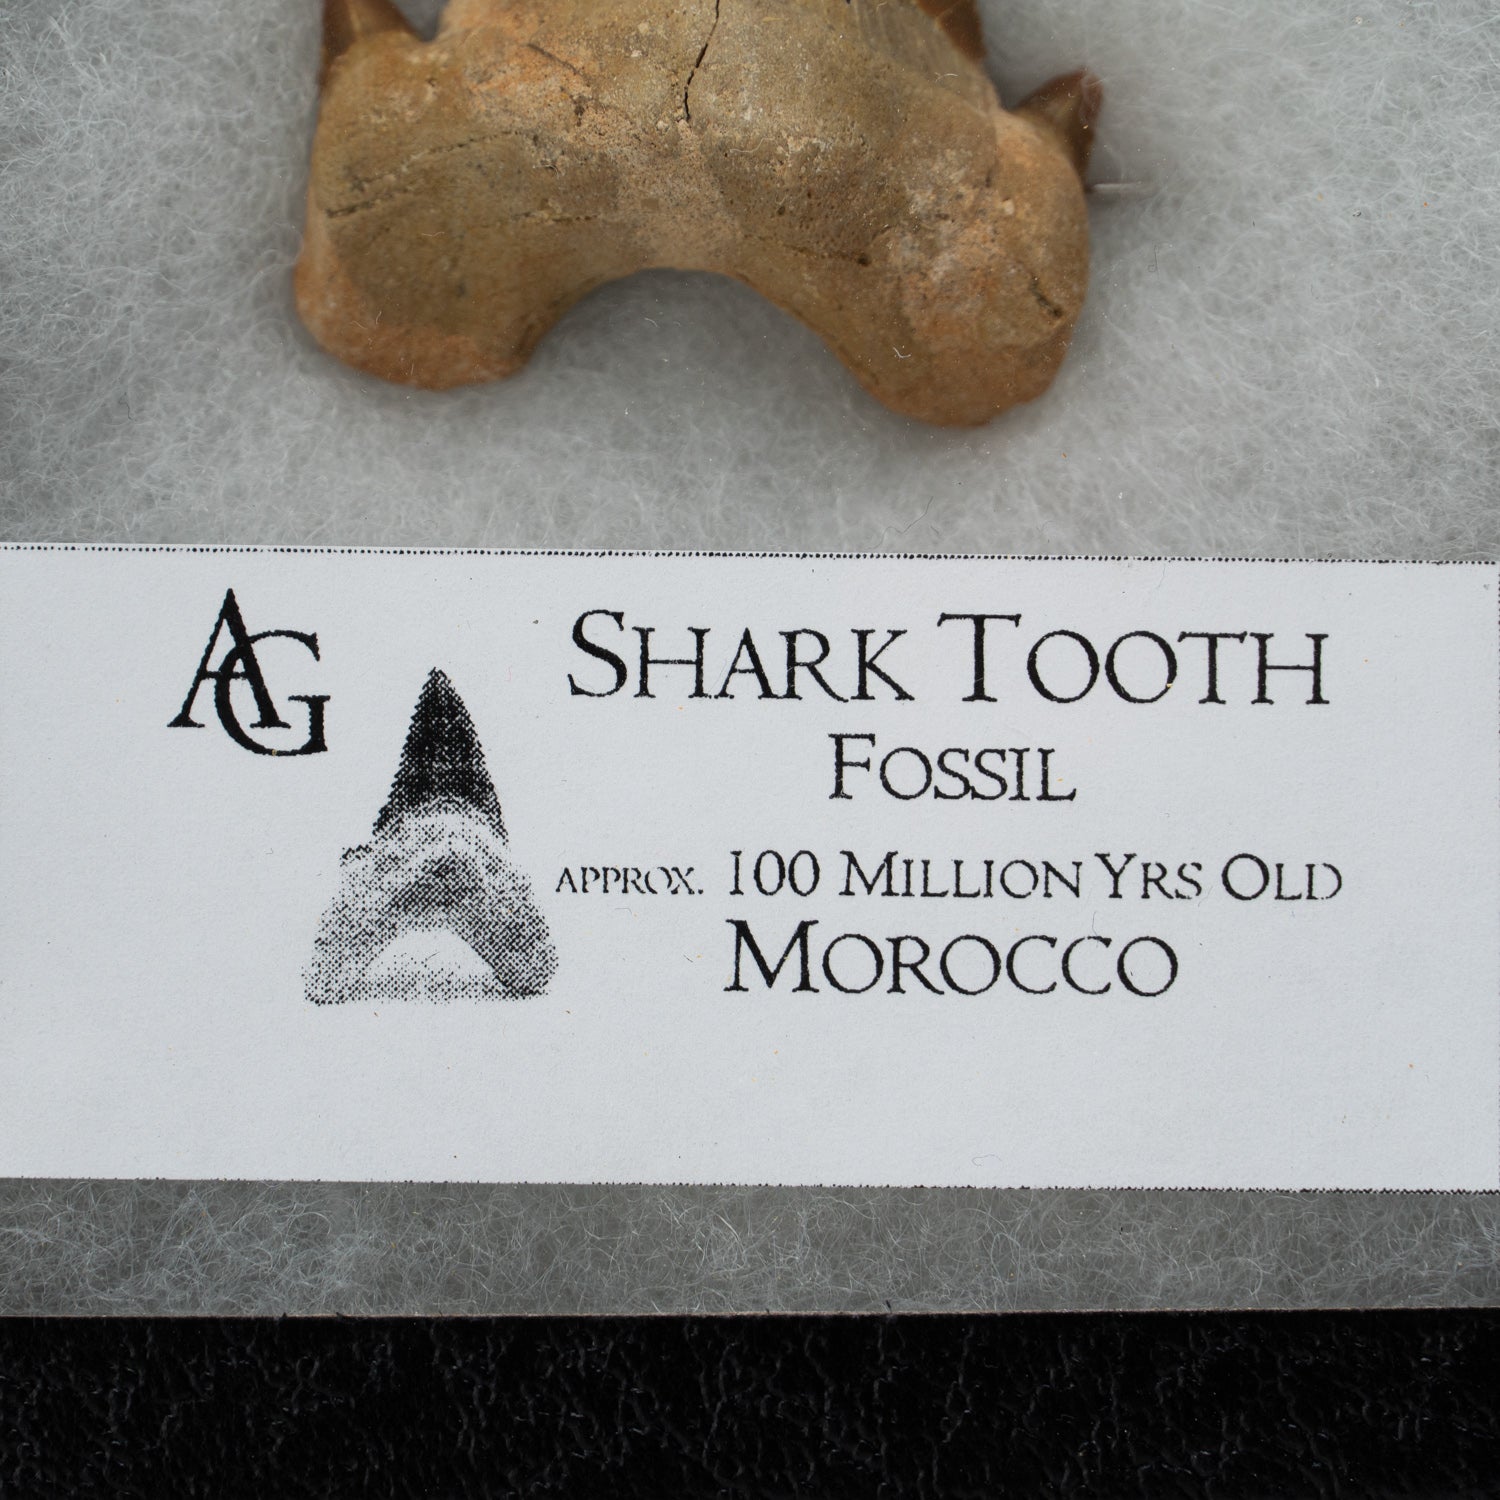 Genuine Pre-Historic Shark Tooth in Display Box